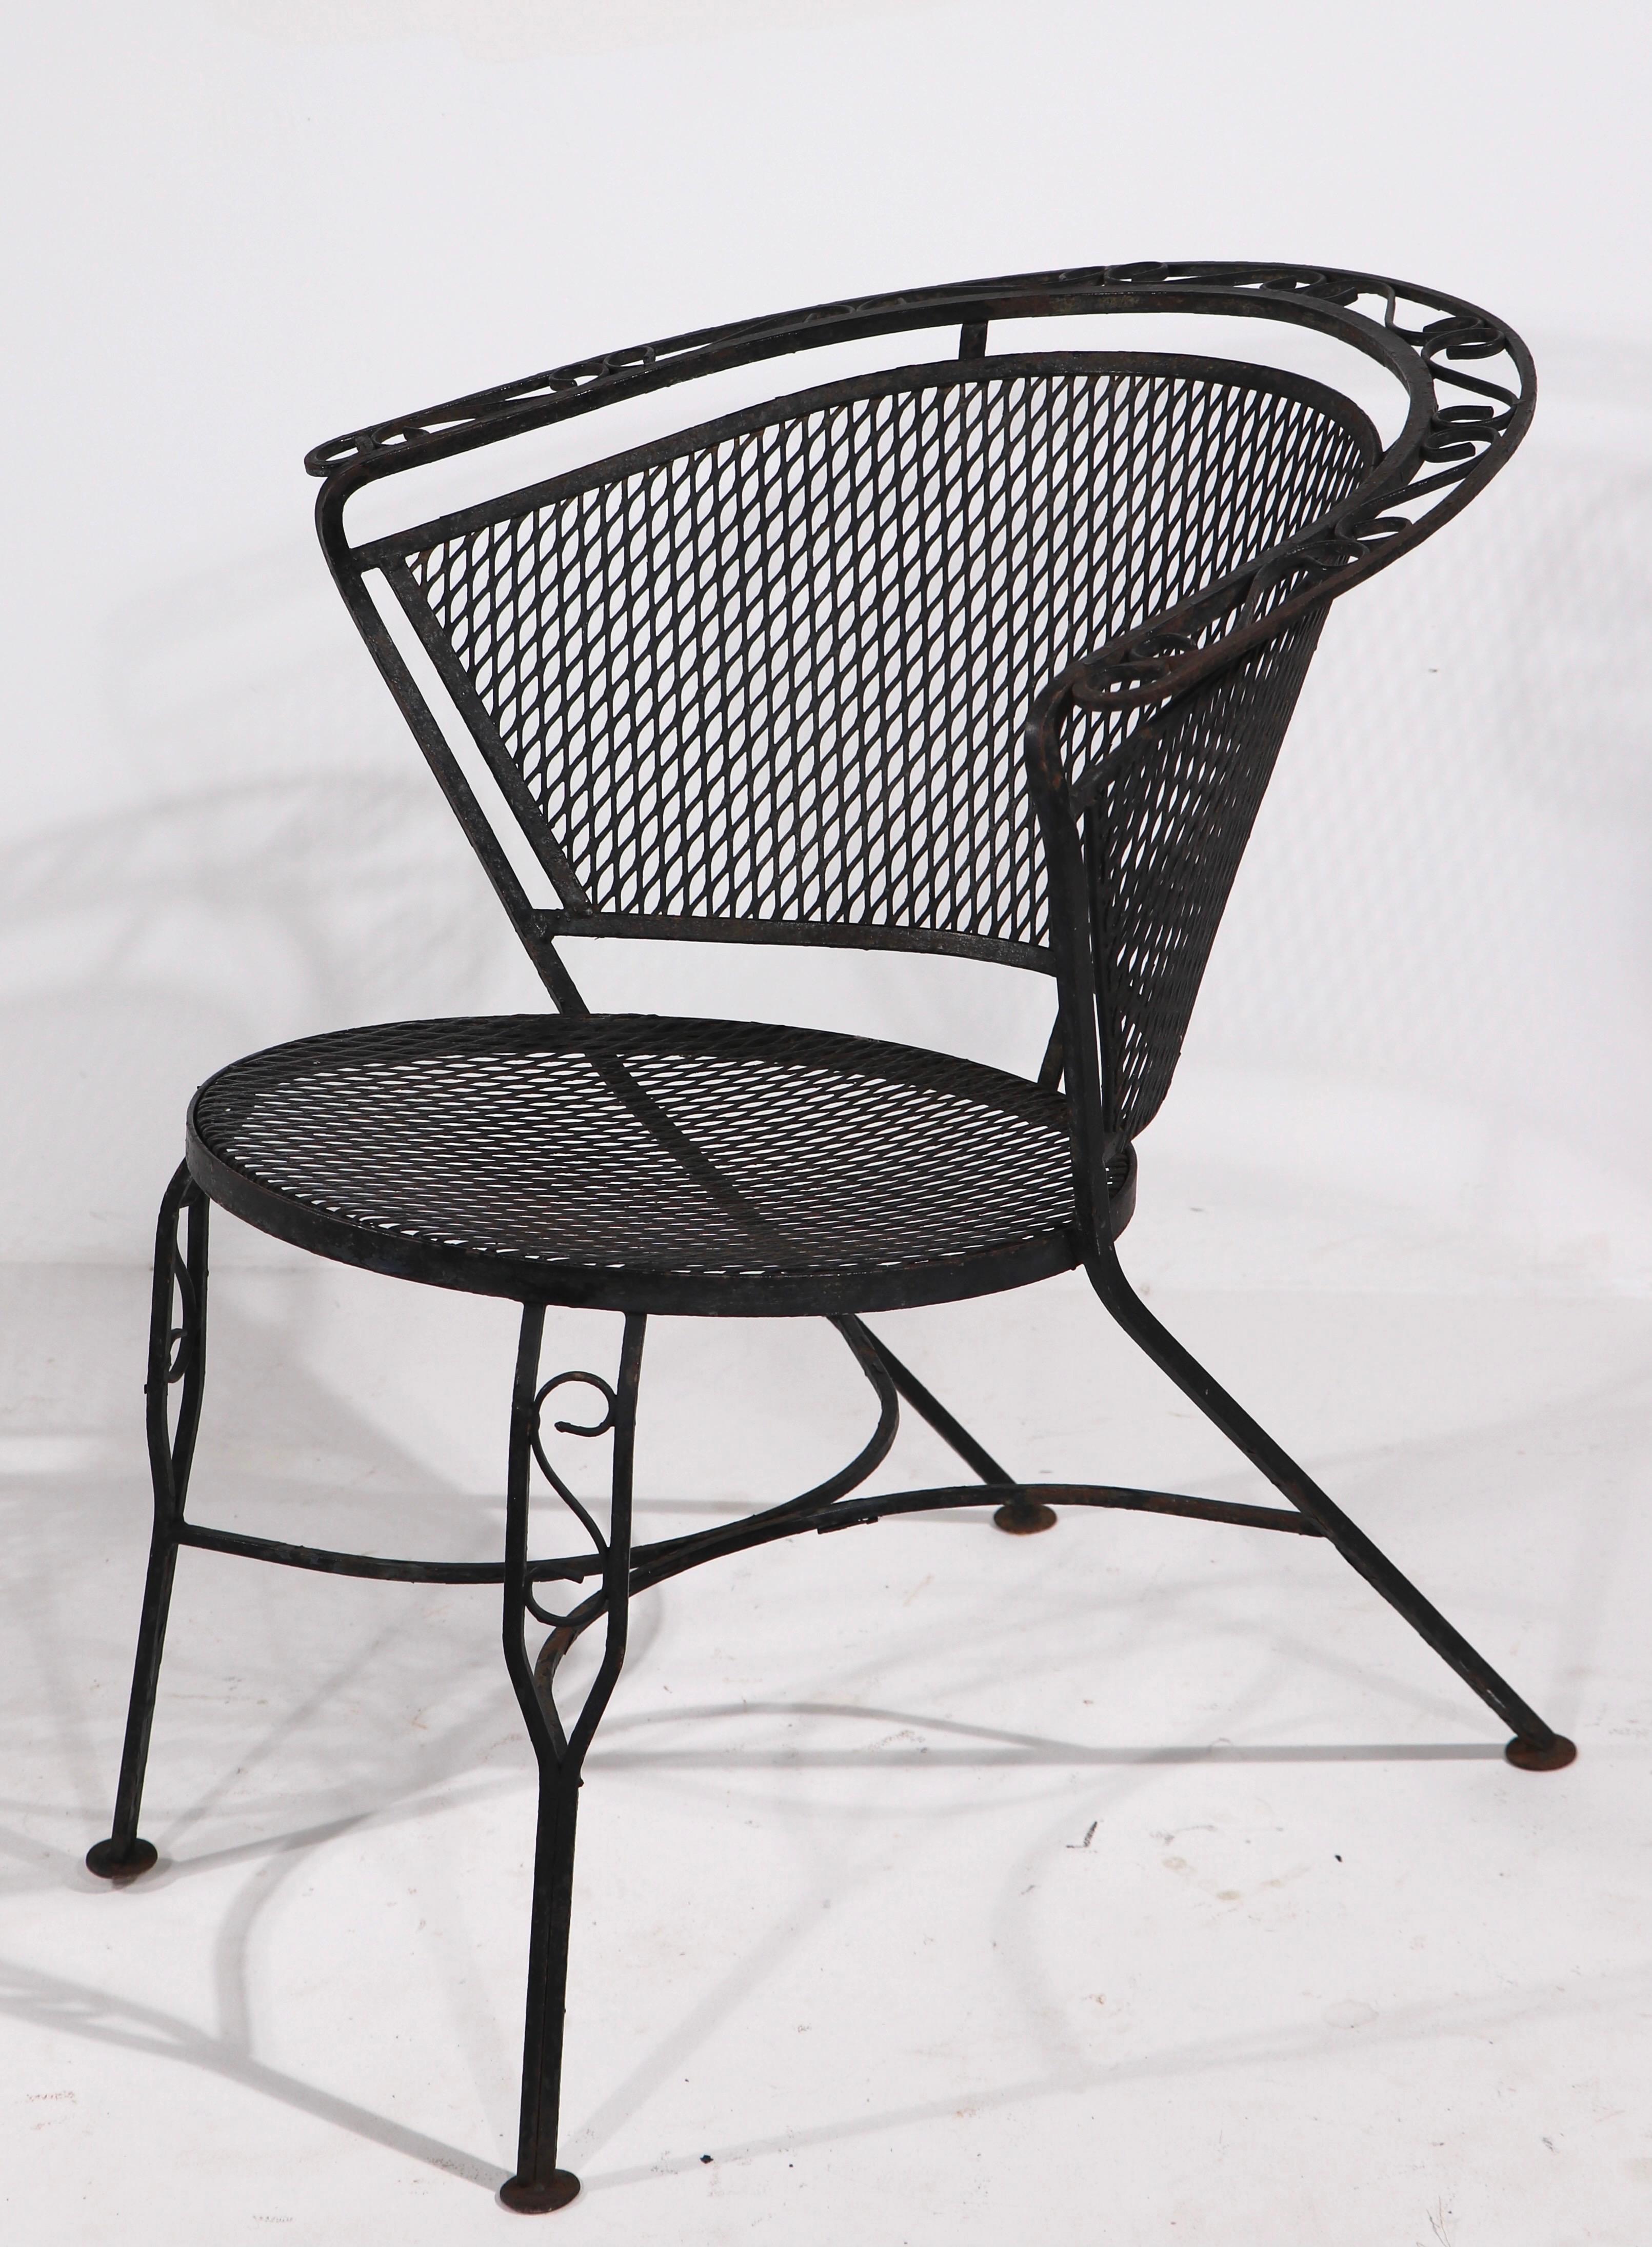 Chic and stylish pair of wrought iron garden, patio, poolside lounge chairs attributed to Salterini. The chairs have wrought iron frames, with metal mesh seats and backs. Both are in good original condition, free of structural damage or repairs,